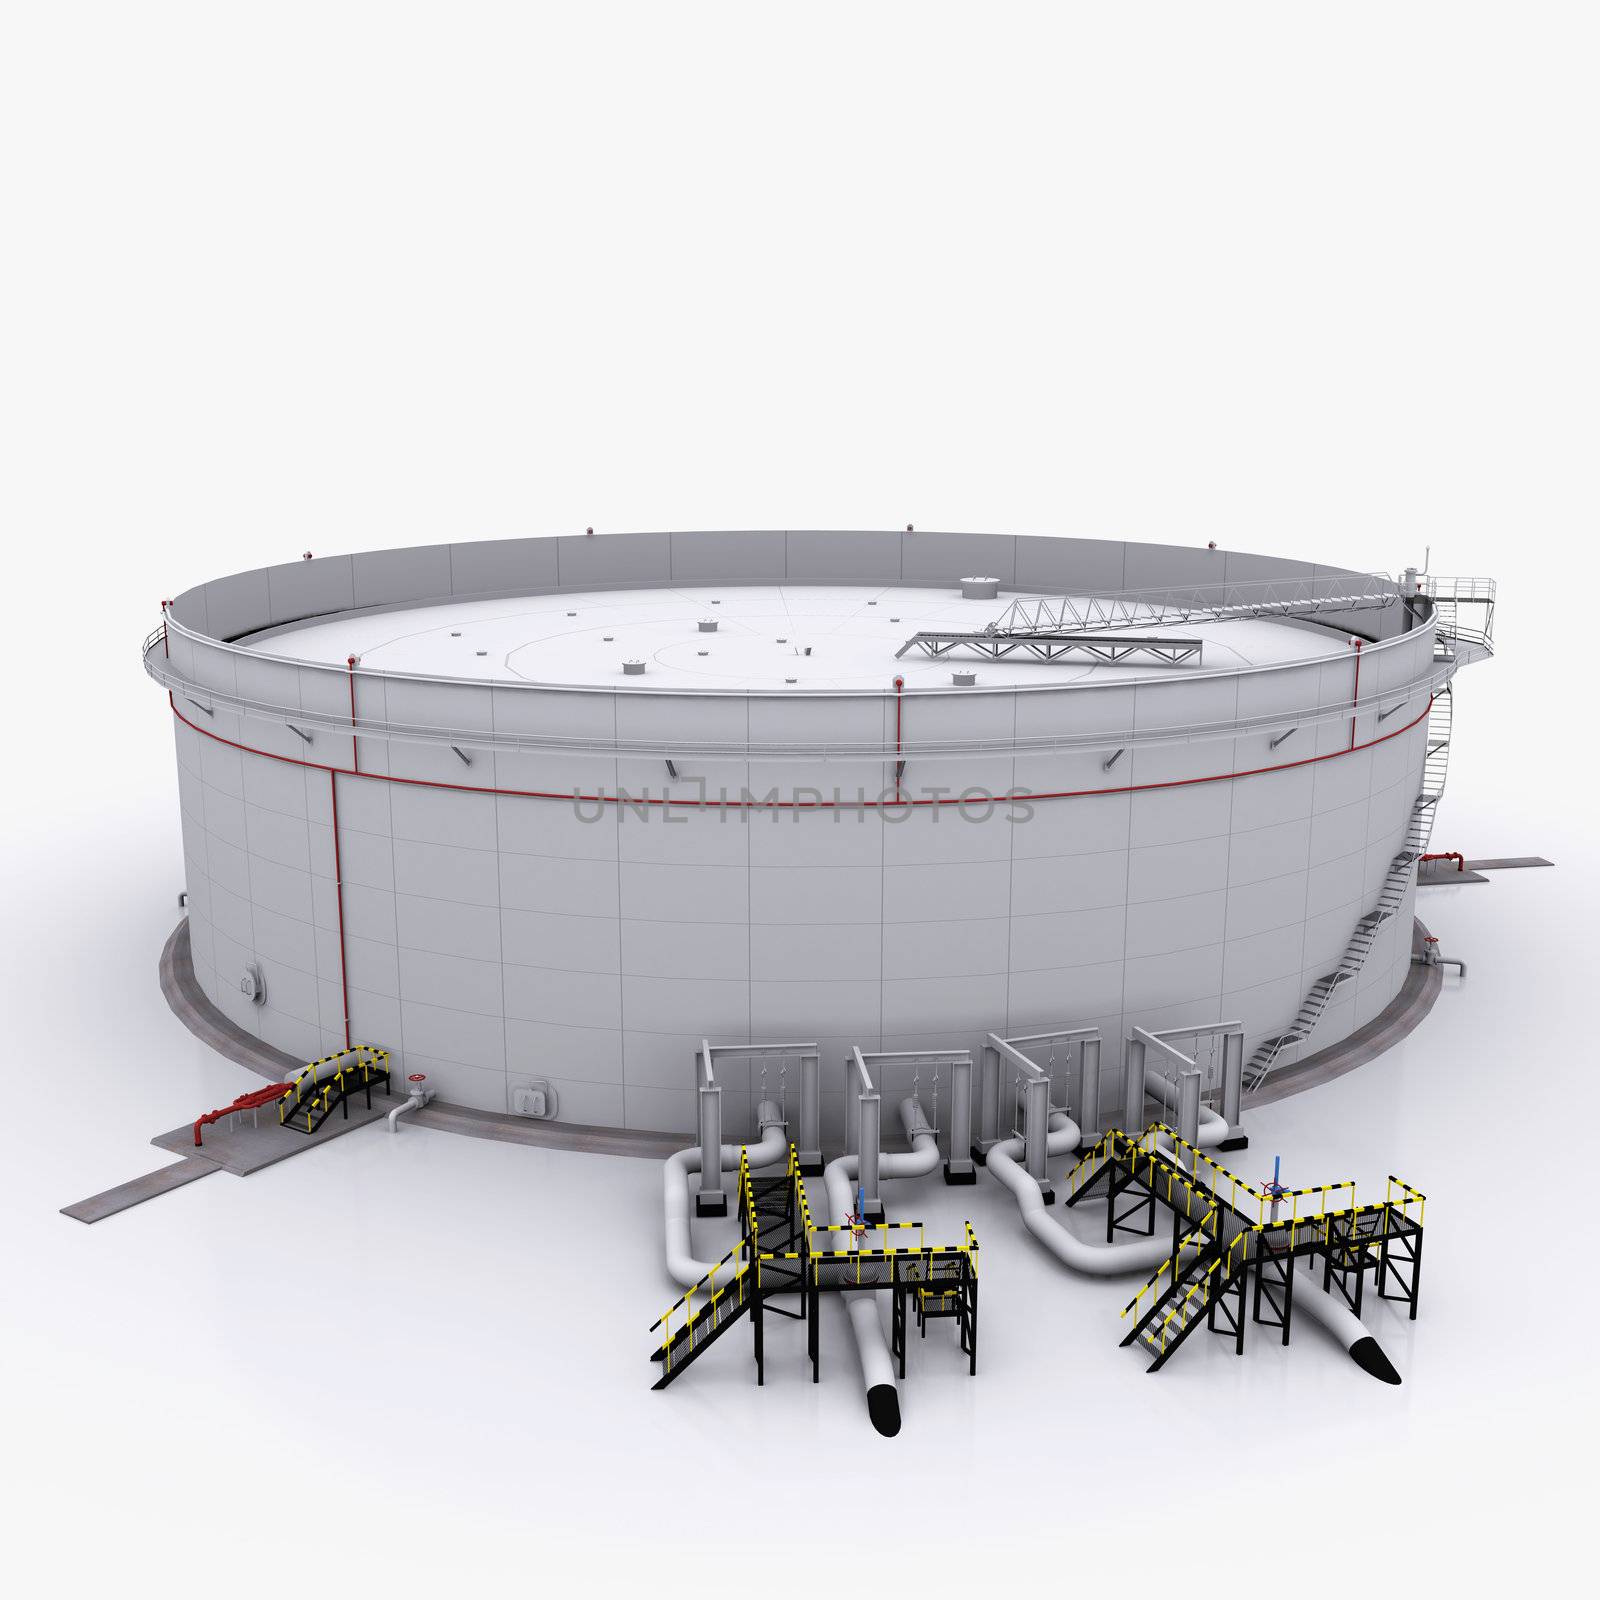 Large oil tank with floating roof. Isolated on white background